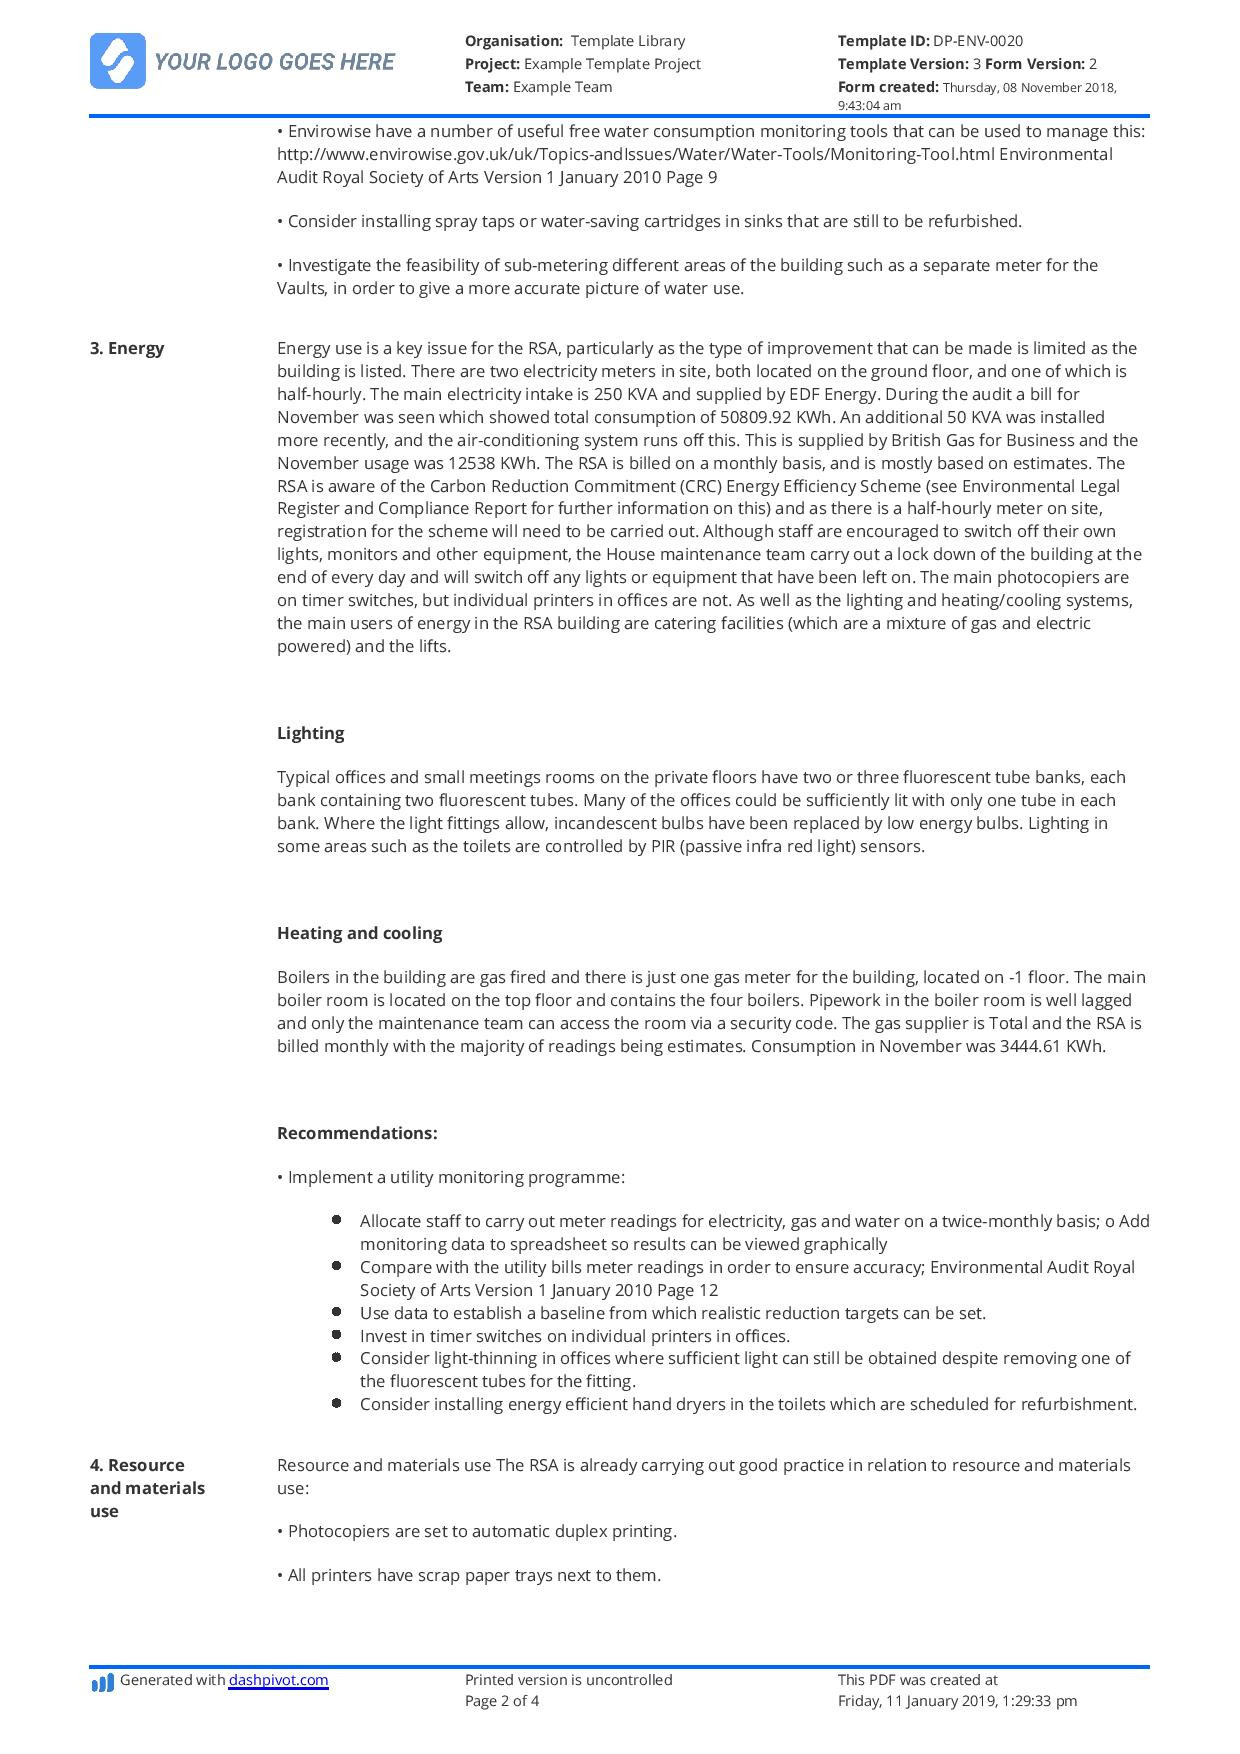 Sample Resume Safety Audit Report Template Construction Audit Report Sample: for Safety, Quality, Environmental